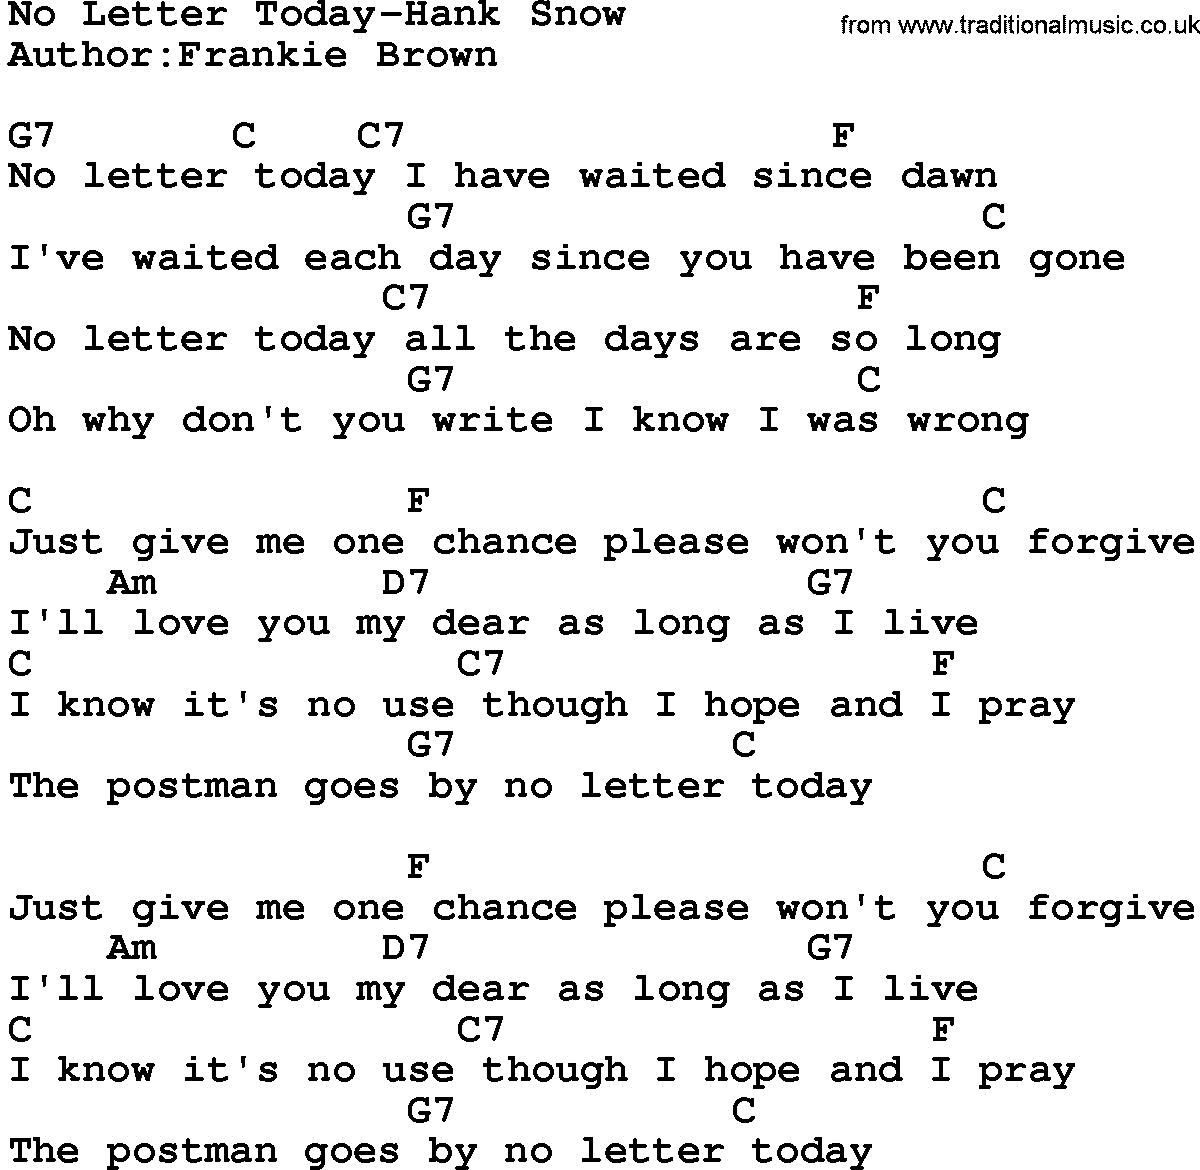 Country music song: No Letter Today-Hank Snow lyrics and chords